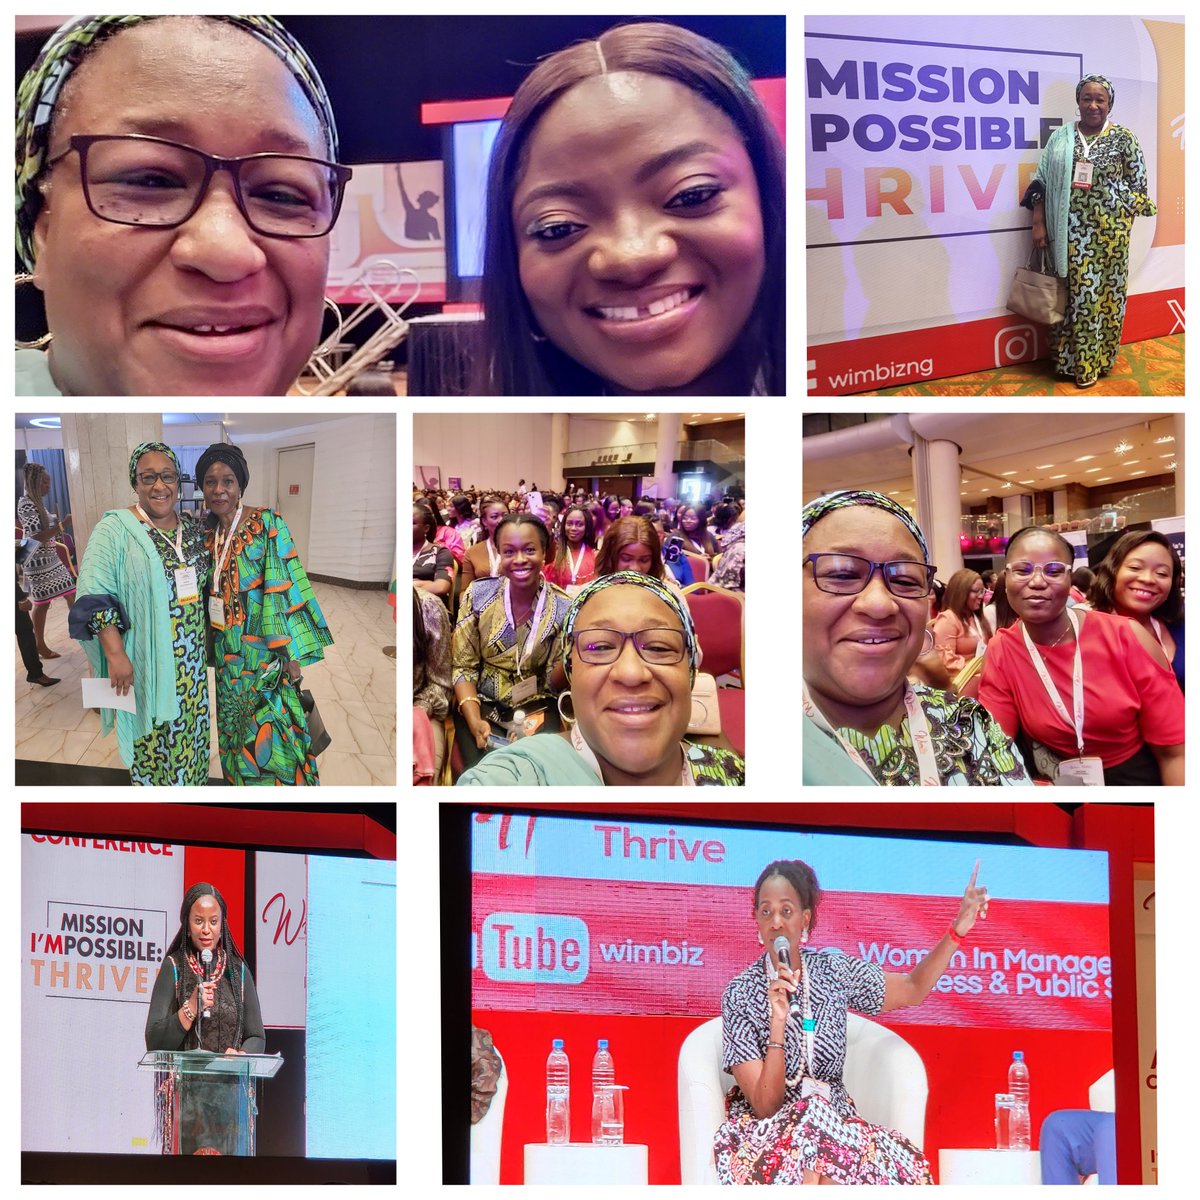 Sights and sounds of @Wimbiz conference 2023. #Wimbiz #WIMBIZAnnualConference #MissionImpossible #Thrive was so excited to meet @OloriSupergal. She certainly paved the way for modern blogging in Nigeria.